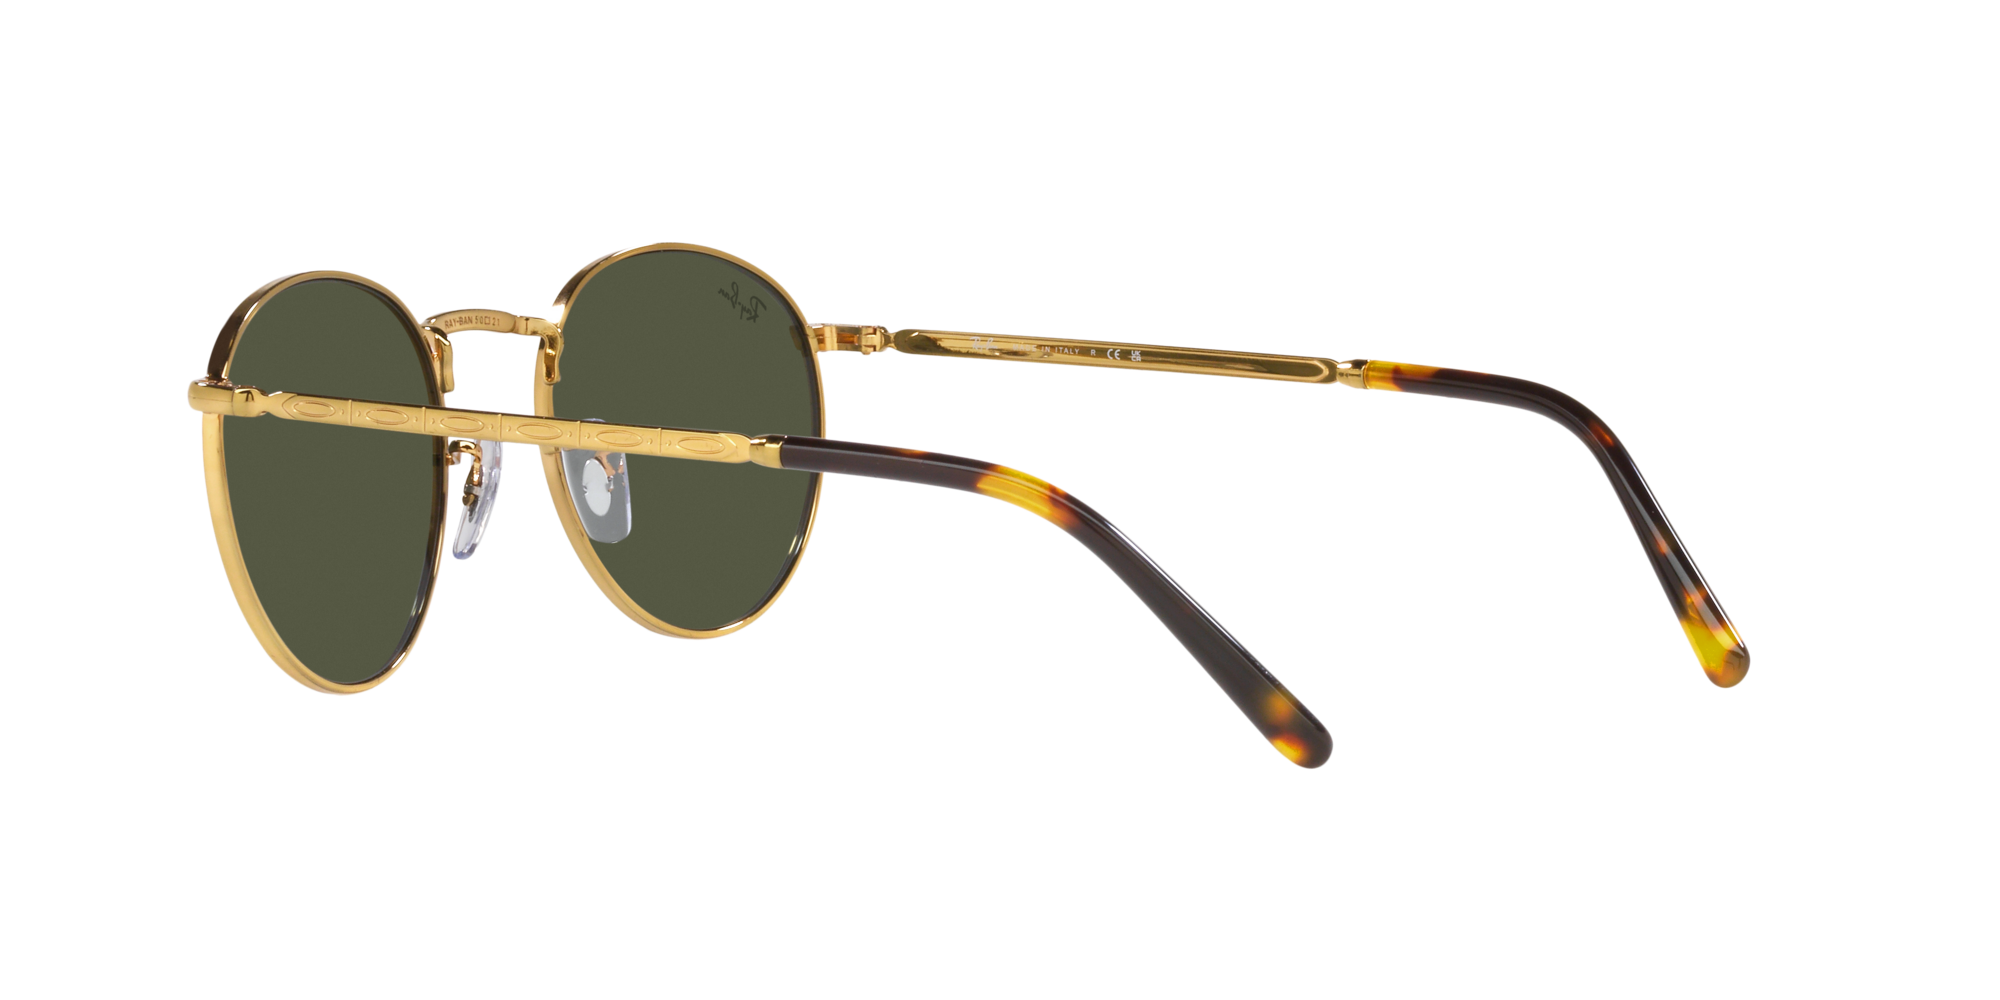 New Round Ray Ban Unisex Sonnenbrille in Gold RB3637 919631 50